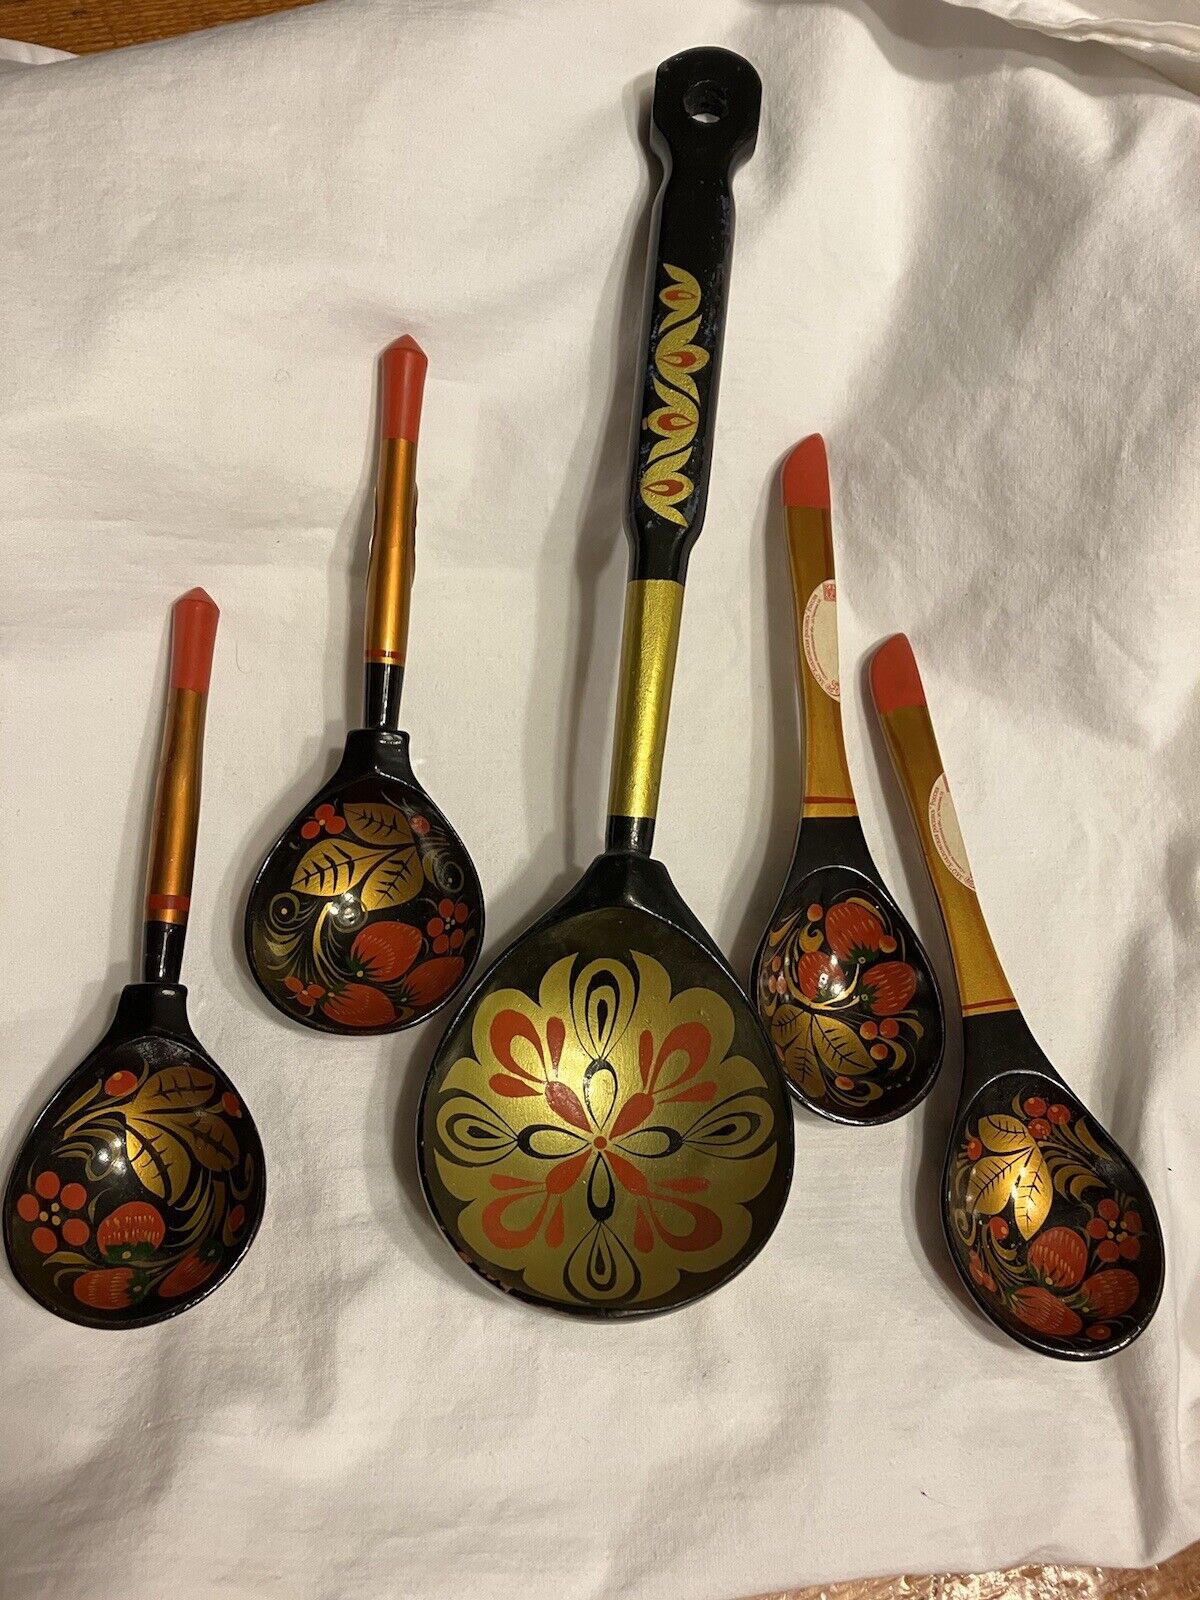 5 Russian Folk Art Hand Painted Spoons Floral Decorated 1-12” & 4-7 1/2”